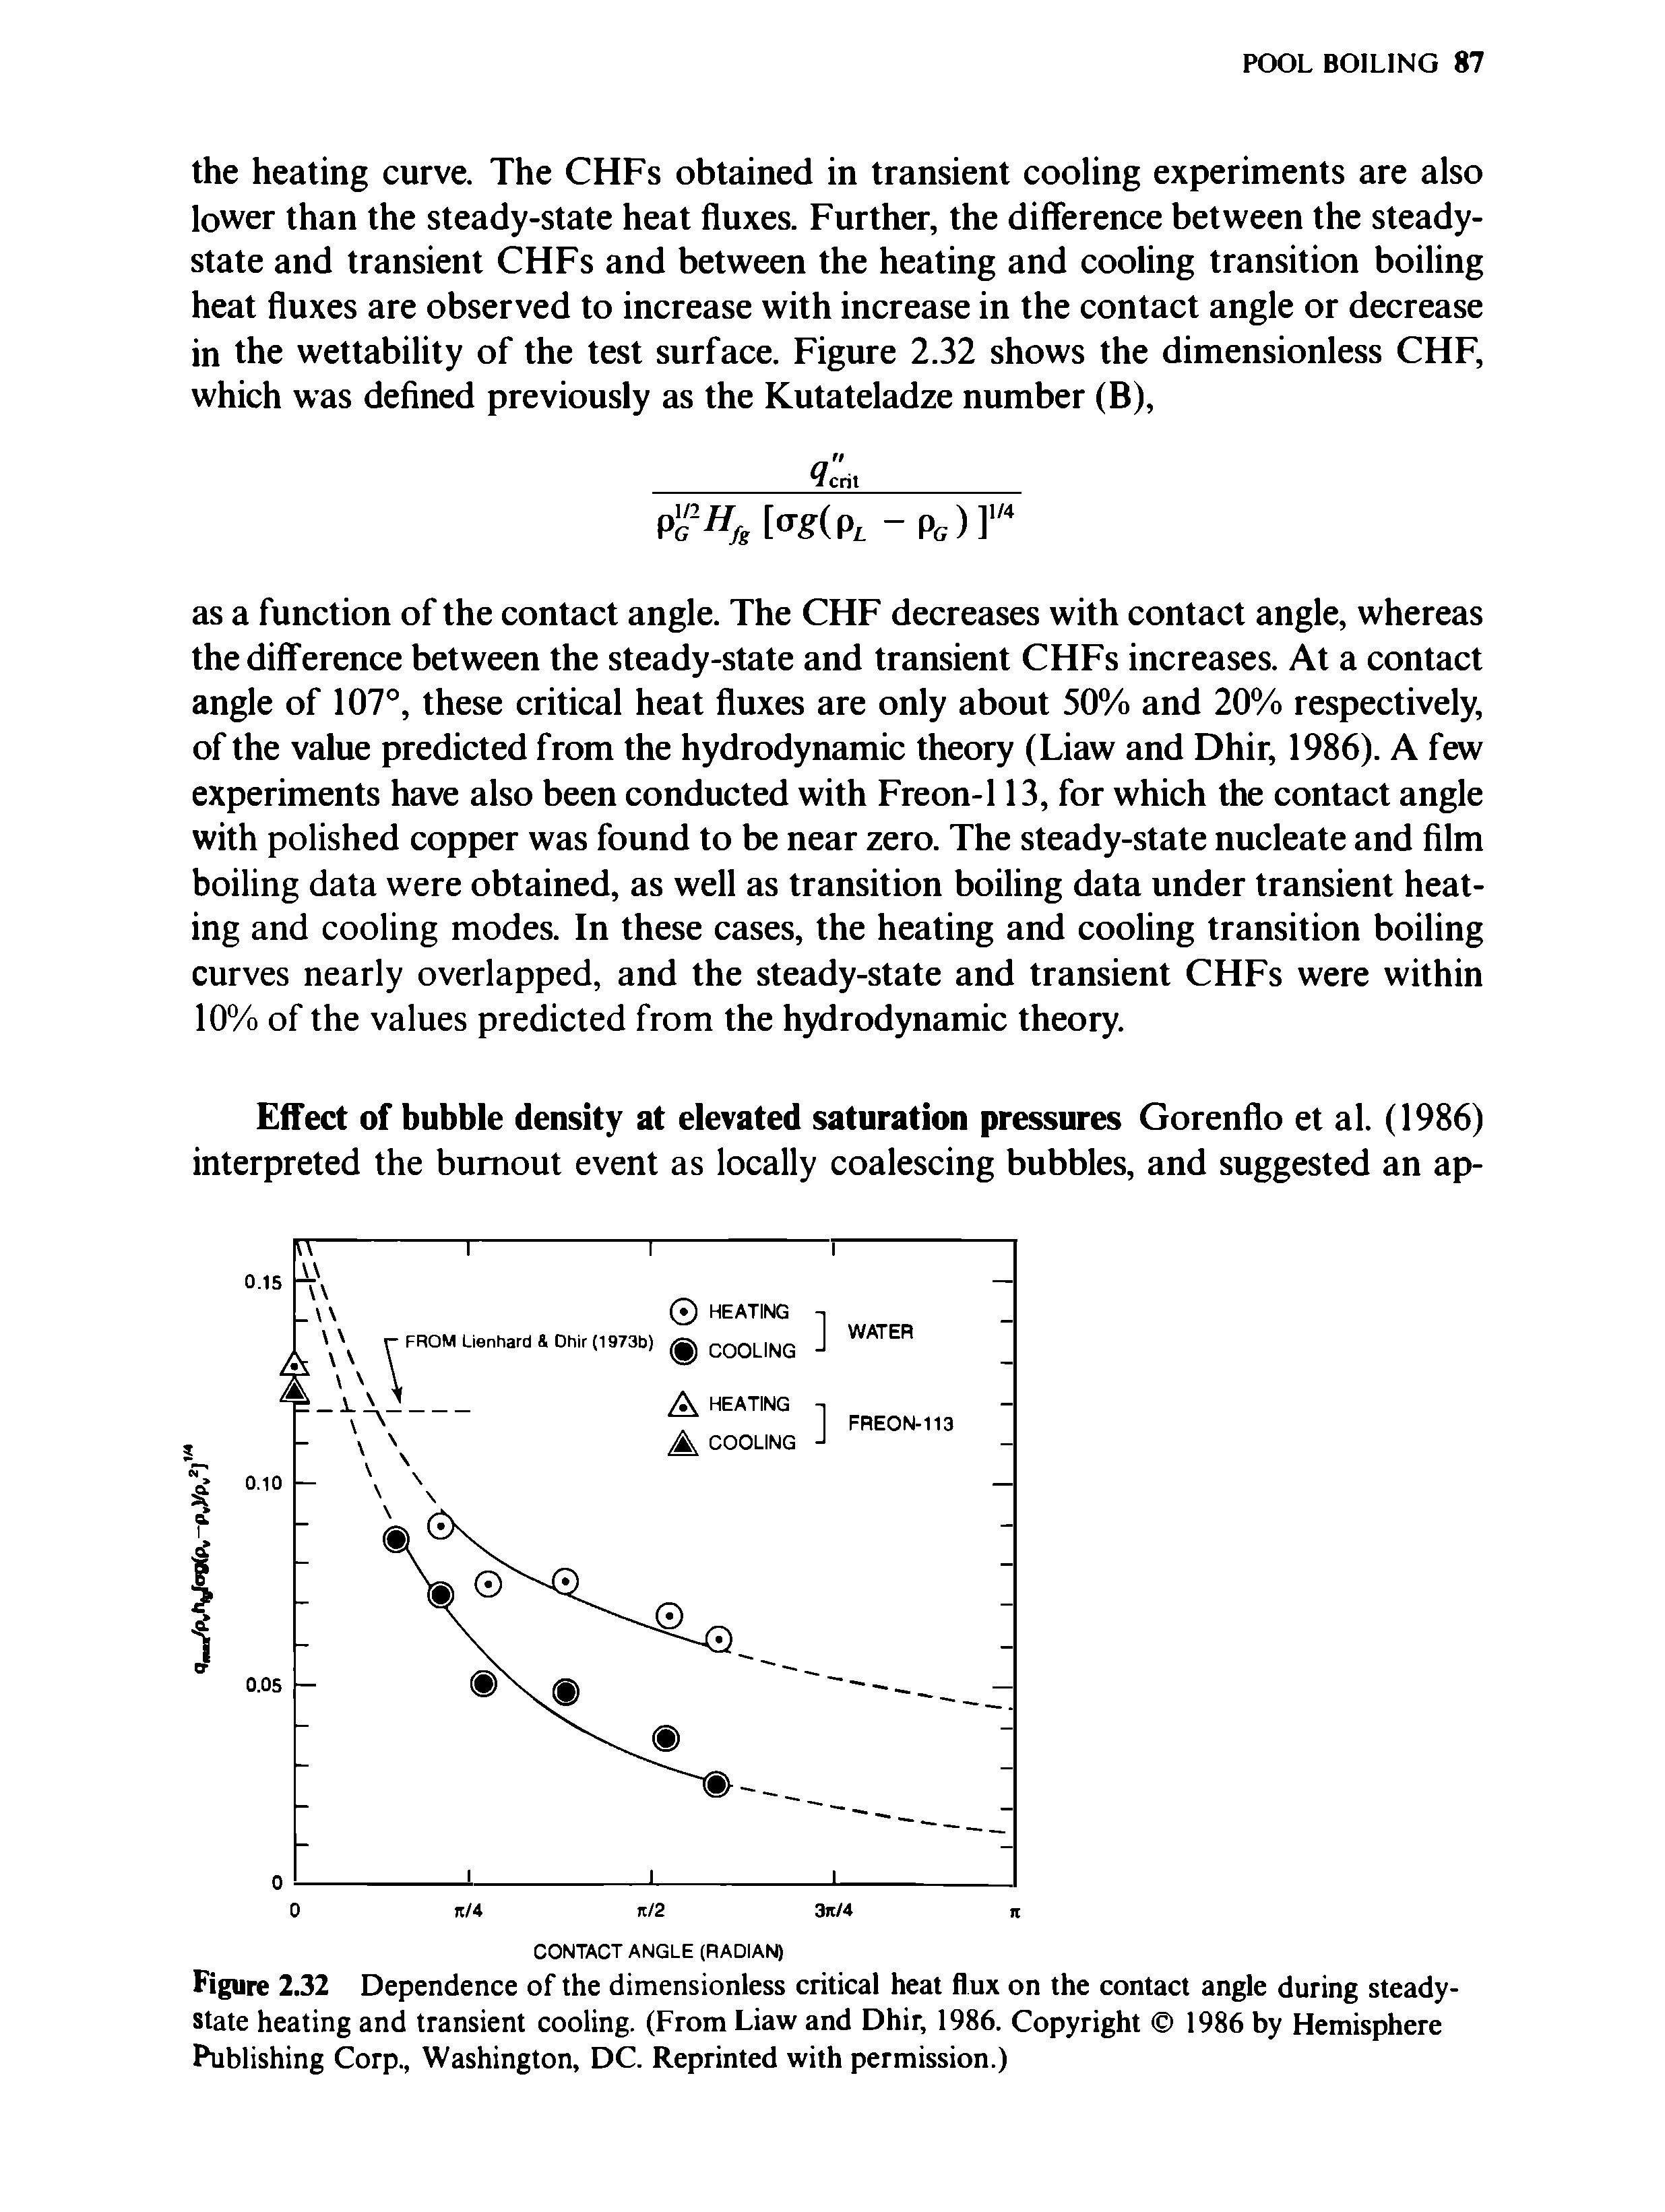 Figure 2.32 Dependence of the dimensionless critical heat flux on the contact angle during steady-state heating and transient cooling. (From Liaw and Dhir, 1986. Copyright 1986 by Hemisphere Publishing Corp., Washington, DC. Reprinted with permission.)...